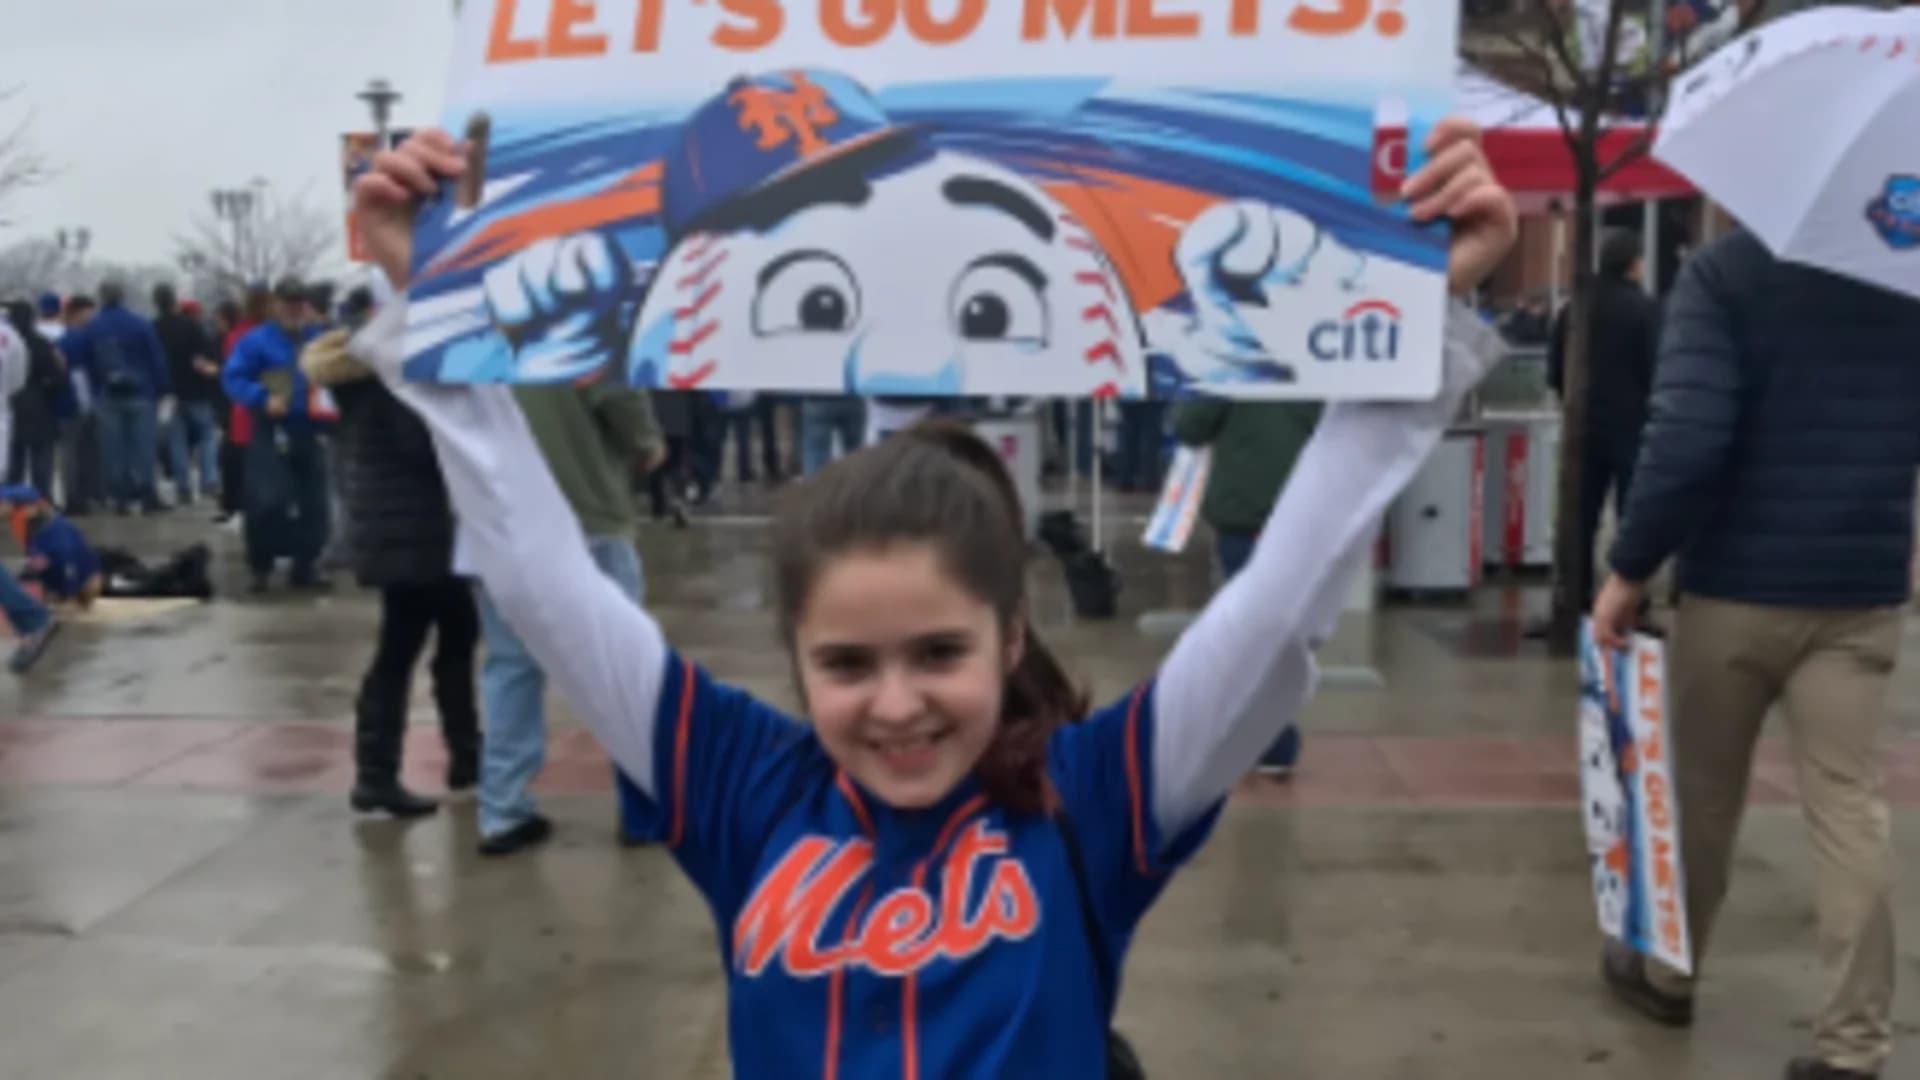 Show Your Mets Pride for the Home Opener